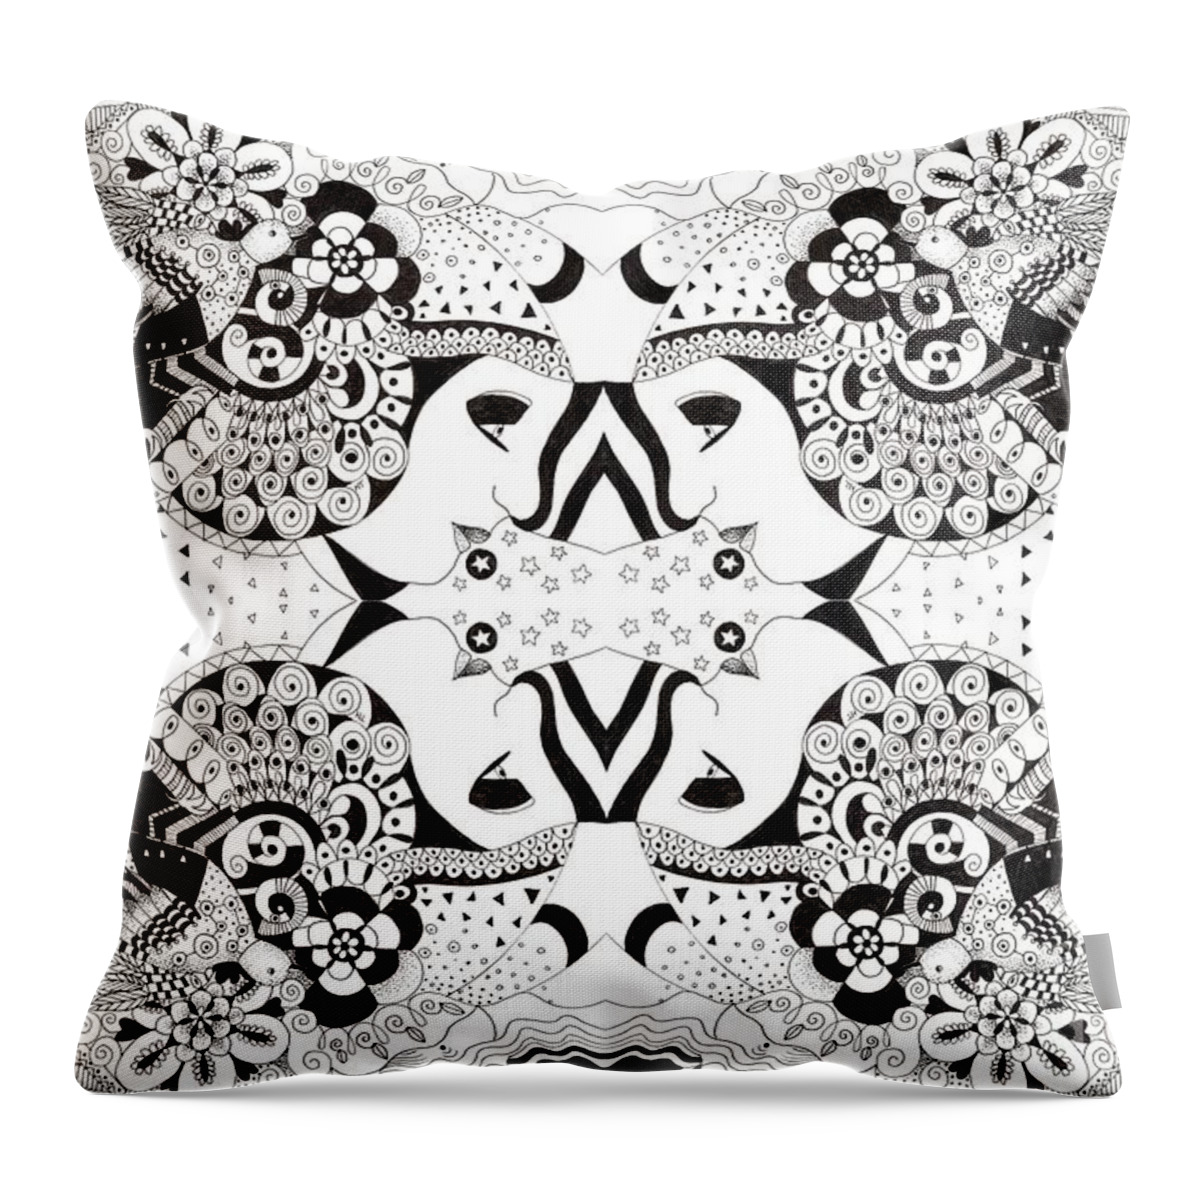 Ceilings And Floors By Helena Tiainen Throw Pillow featuring the mixed media Ceilings and Floors by Helena Tiainen